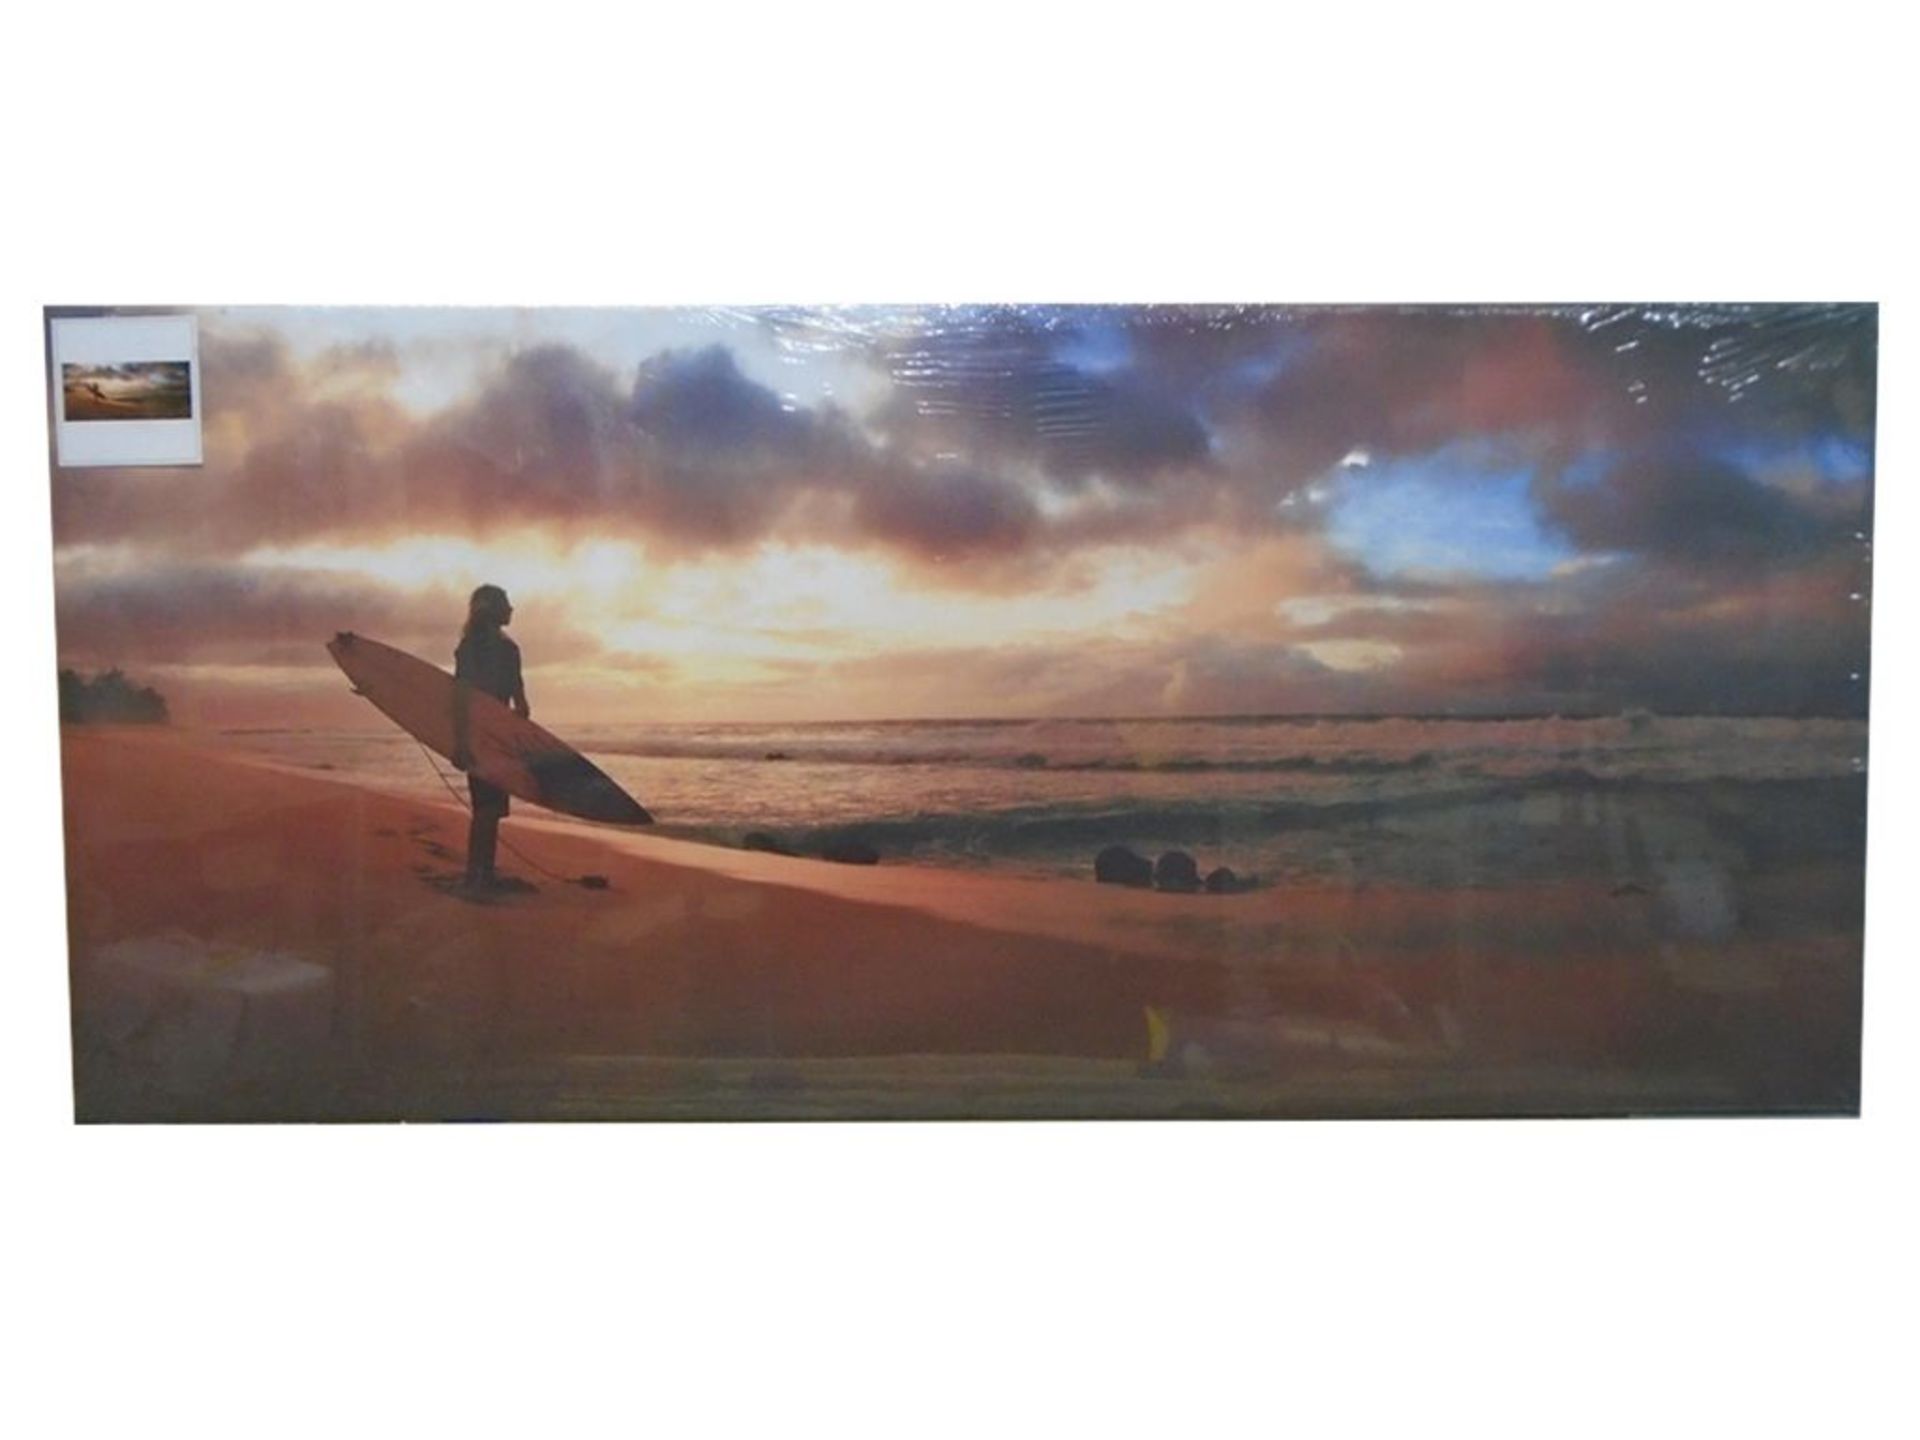 1 BRAND NEW BOXED LONELY SURFER PRINTED CANVAS